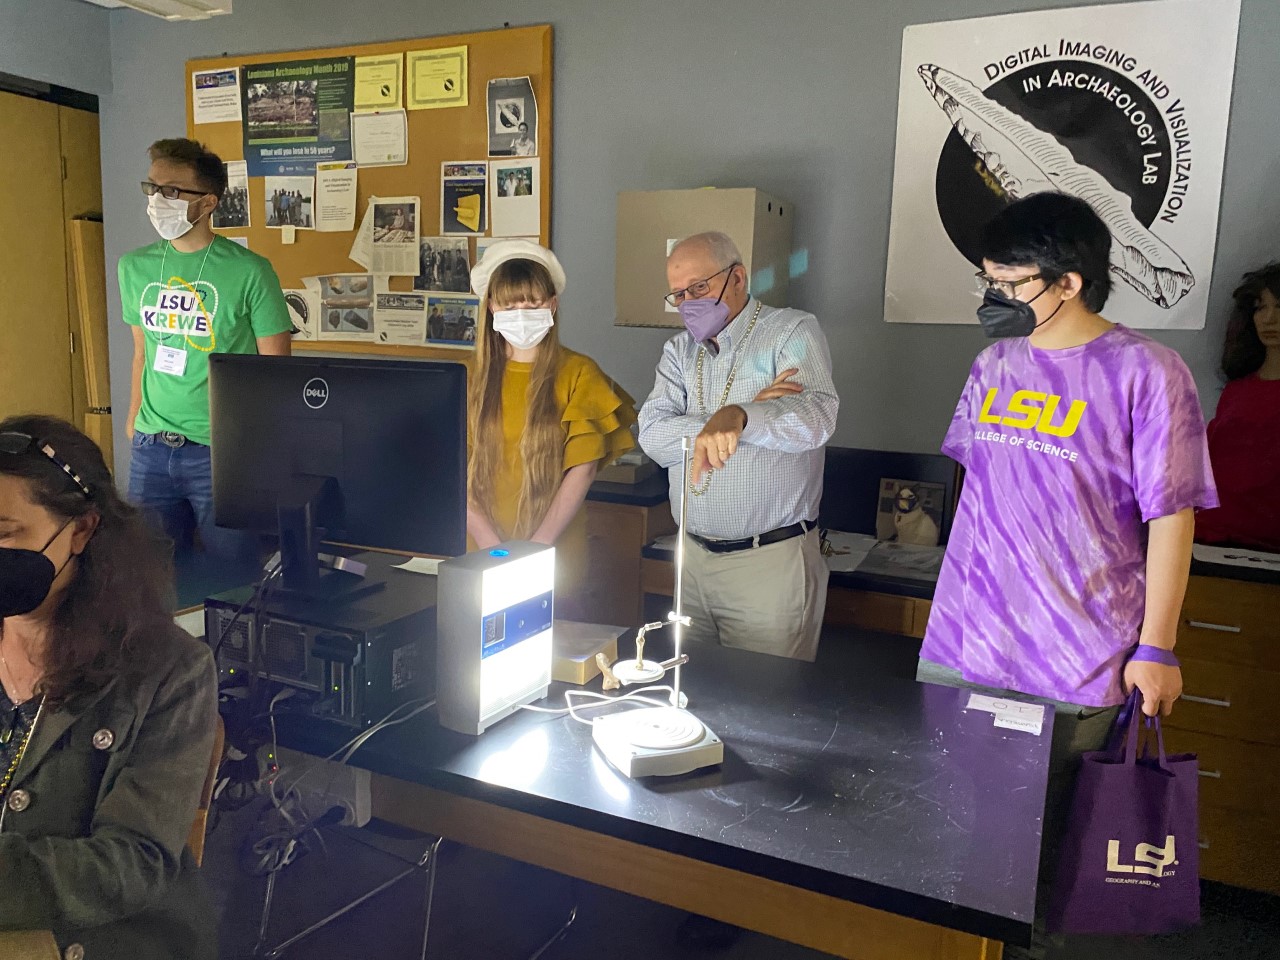 Undergraduates Conan Mills, Eric Labar, and Isabella Lemoine demonstrated use of 3D scanners in the DIVA lab during the tour